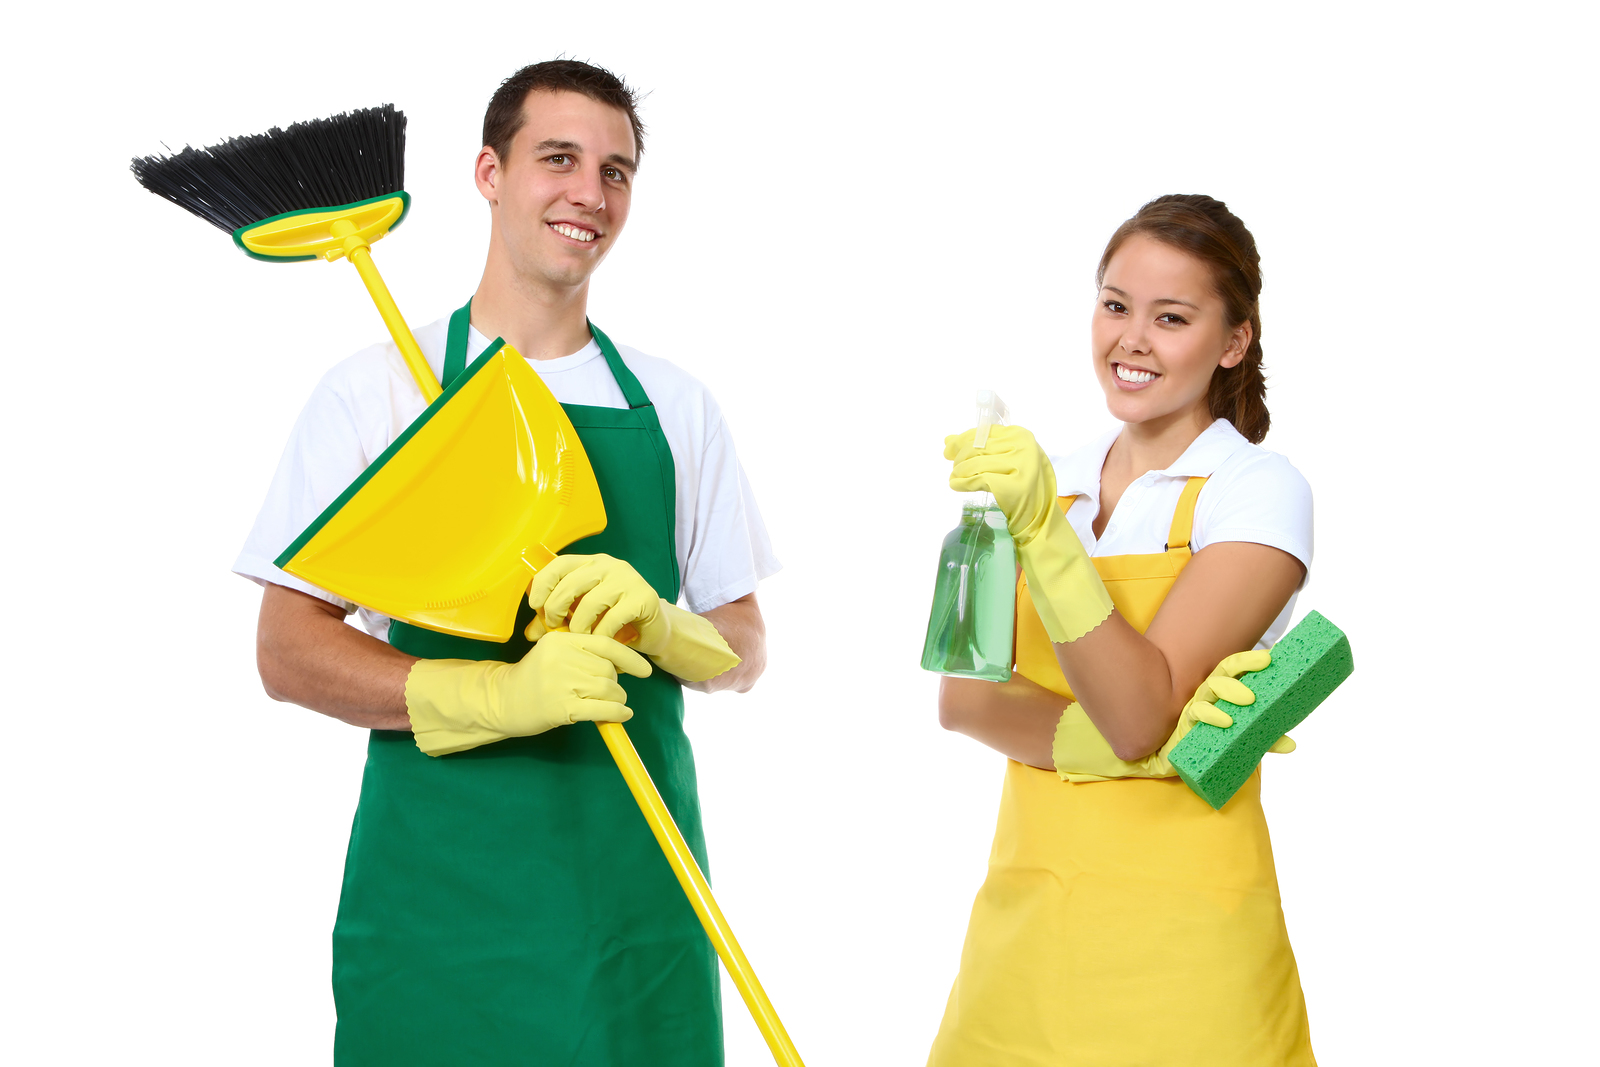 domestic cleaners